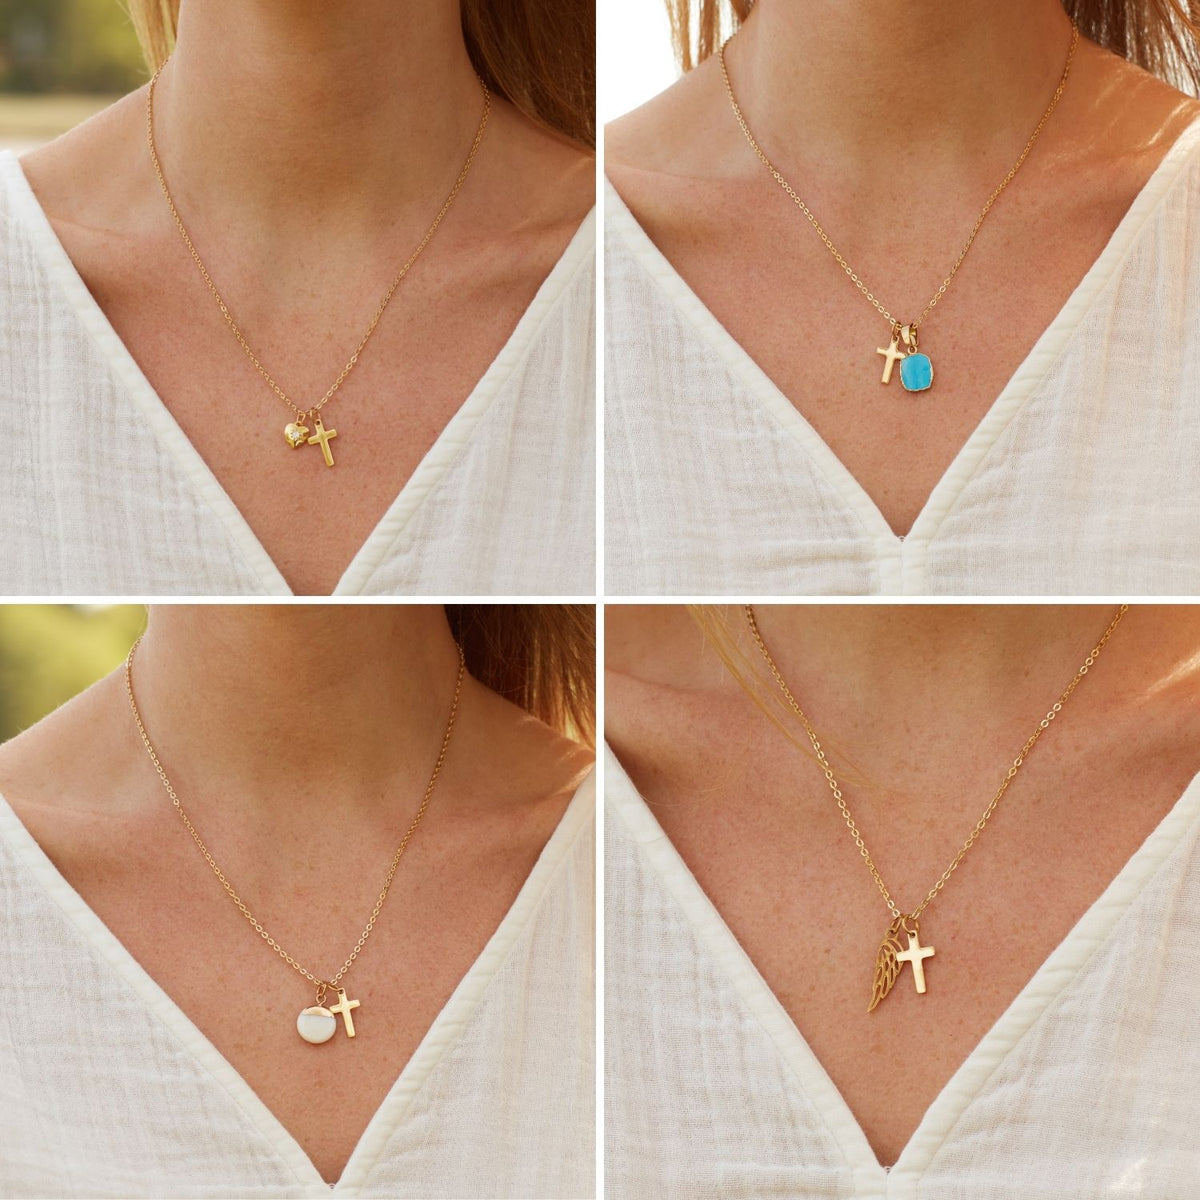 To A Fine Young Woman on Her Confirmation | Peace of Jesus | Cross Necklace